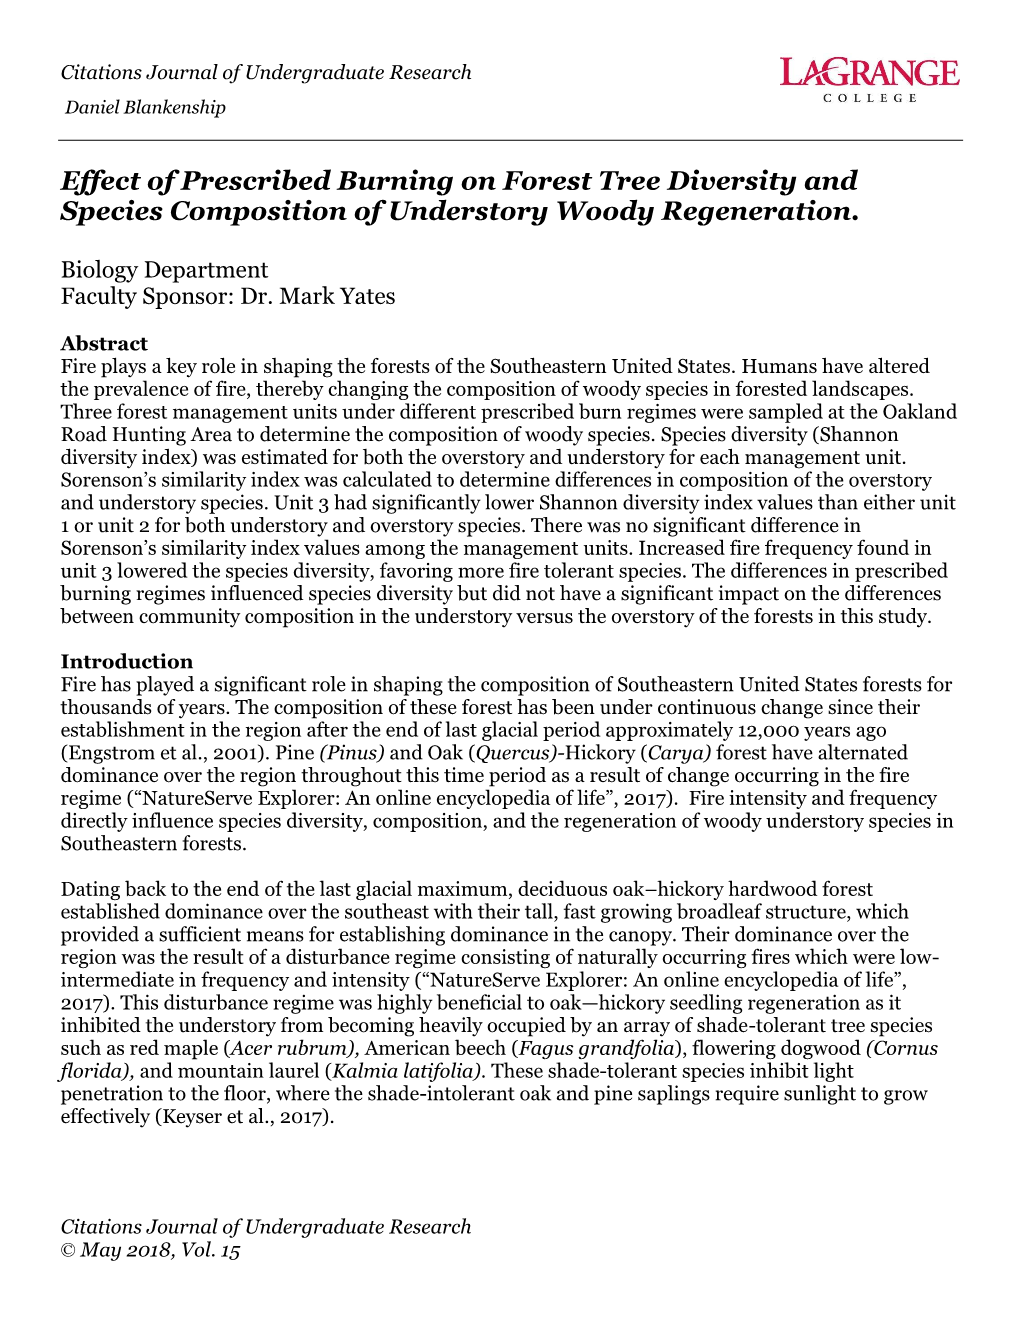 Effect of Prescribed Burning on Forest Tree Diversity and Species Composition of Understory Woody Regeneration